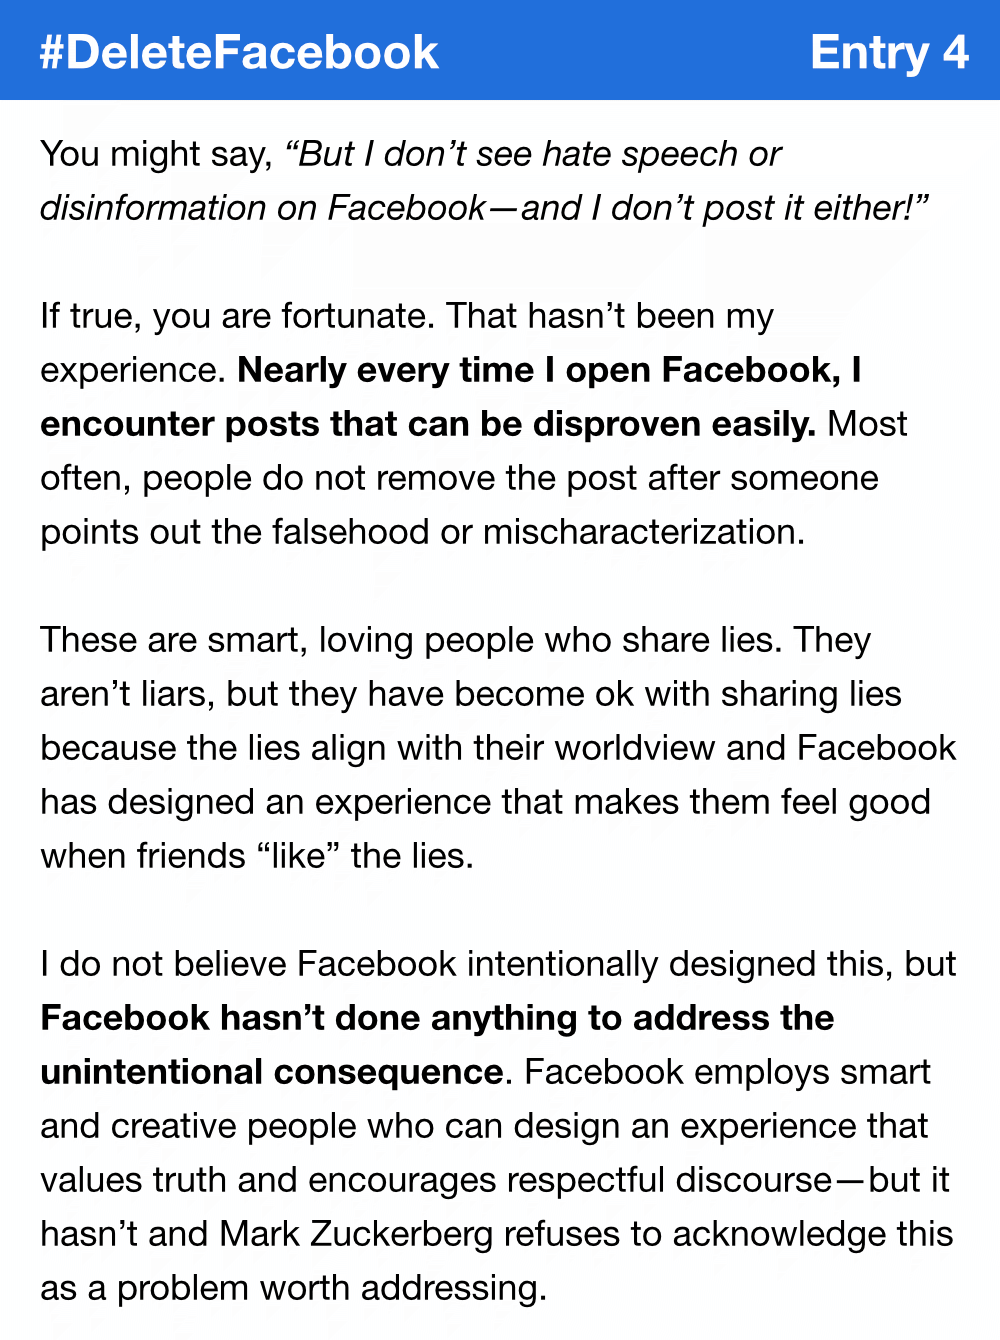 You might say, “But I don’t see hate speech or disinformation on Facebook—and I don’t post it either!” If true, you are fortunate. That hasn’t been my experience. Nearly every time I open Facebook, I encounter posts that can be disproven easily. Most often, people do not remove the post after someone points out the falsehood or mischaracterization.These are smart, loving people who share lies. They aren’t liars, but they have become ok with sharing lies because the lies align with their worldview and Facebook has designed an experience that makes them feel good when friends “like” the lies. I do not believe Facebook intentionally designed this, but Facebook hasn’t done anything to address the unintentional consequence. Facebook employs smart and creative people who can design an experience that values truth and encourages respectful discourse—but it hasn’t and Mark Zuckerberg refuses to acknowledge this as a problem worth addressing.